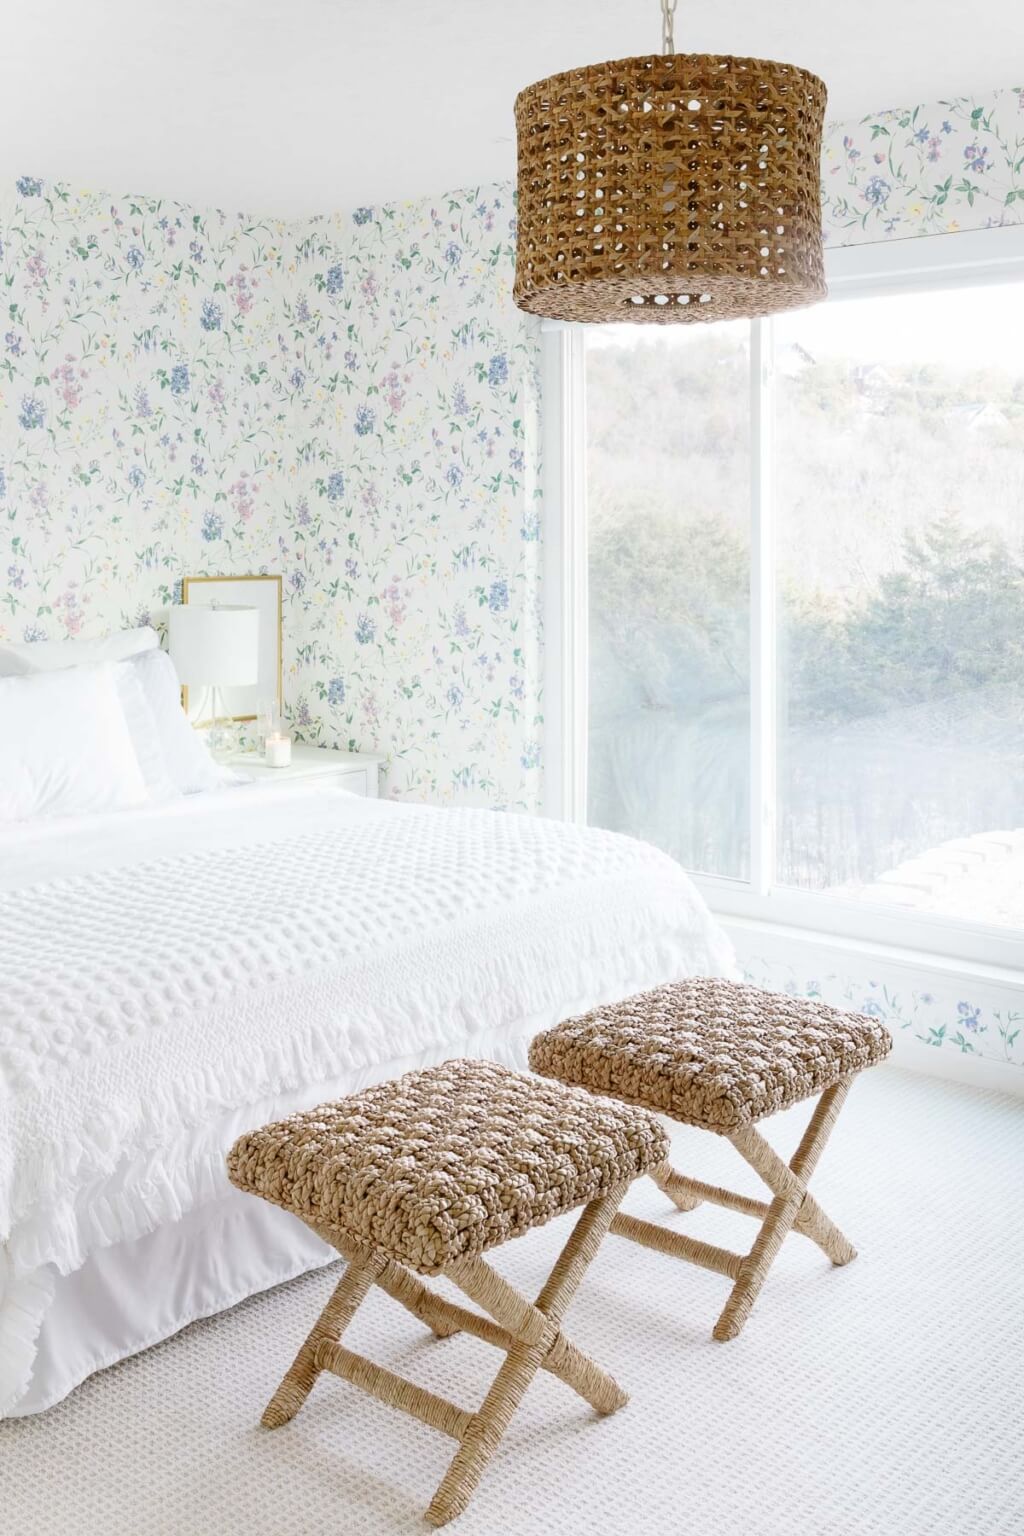 In Cozy Cottage Minimalist Rooms & Decor, this is a Serene white bedroom with pastel wallpaper